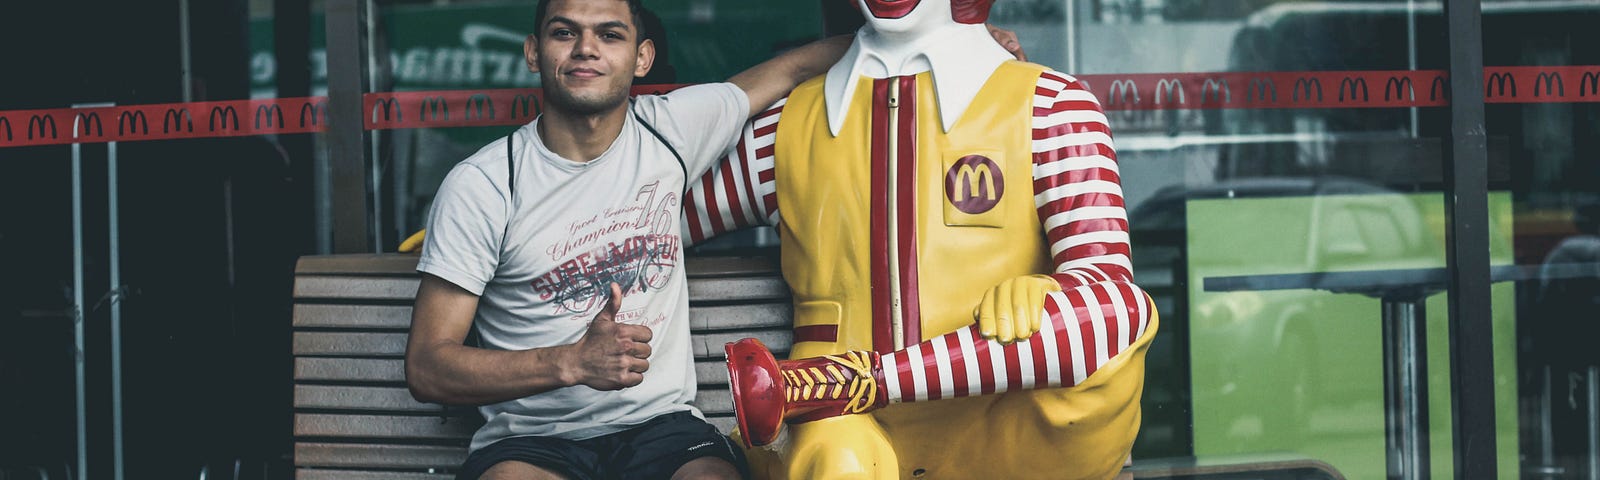 A guy seat with Ronald McDonald on a bench